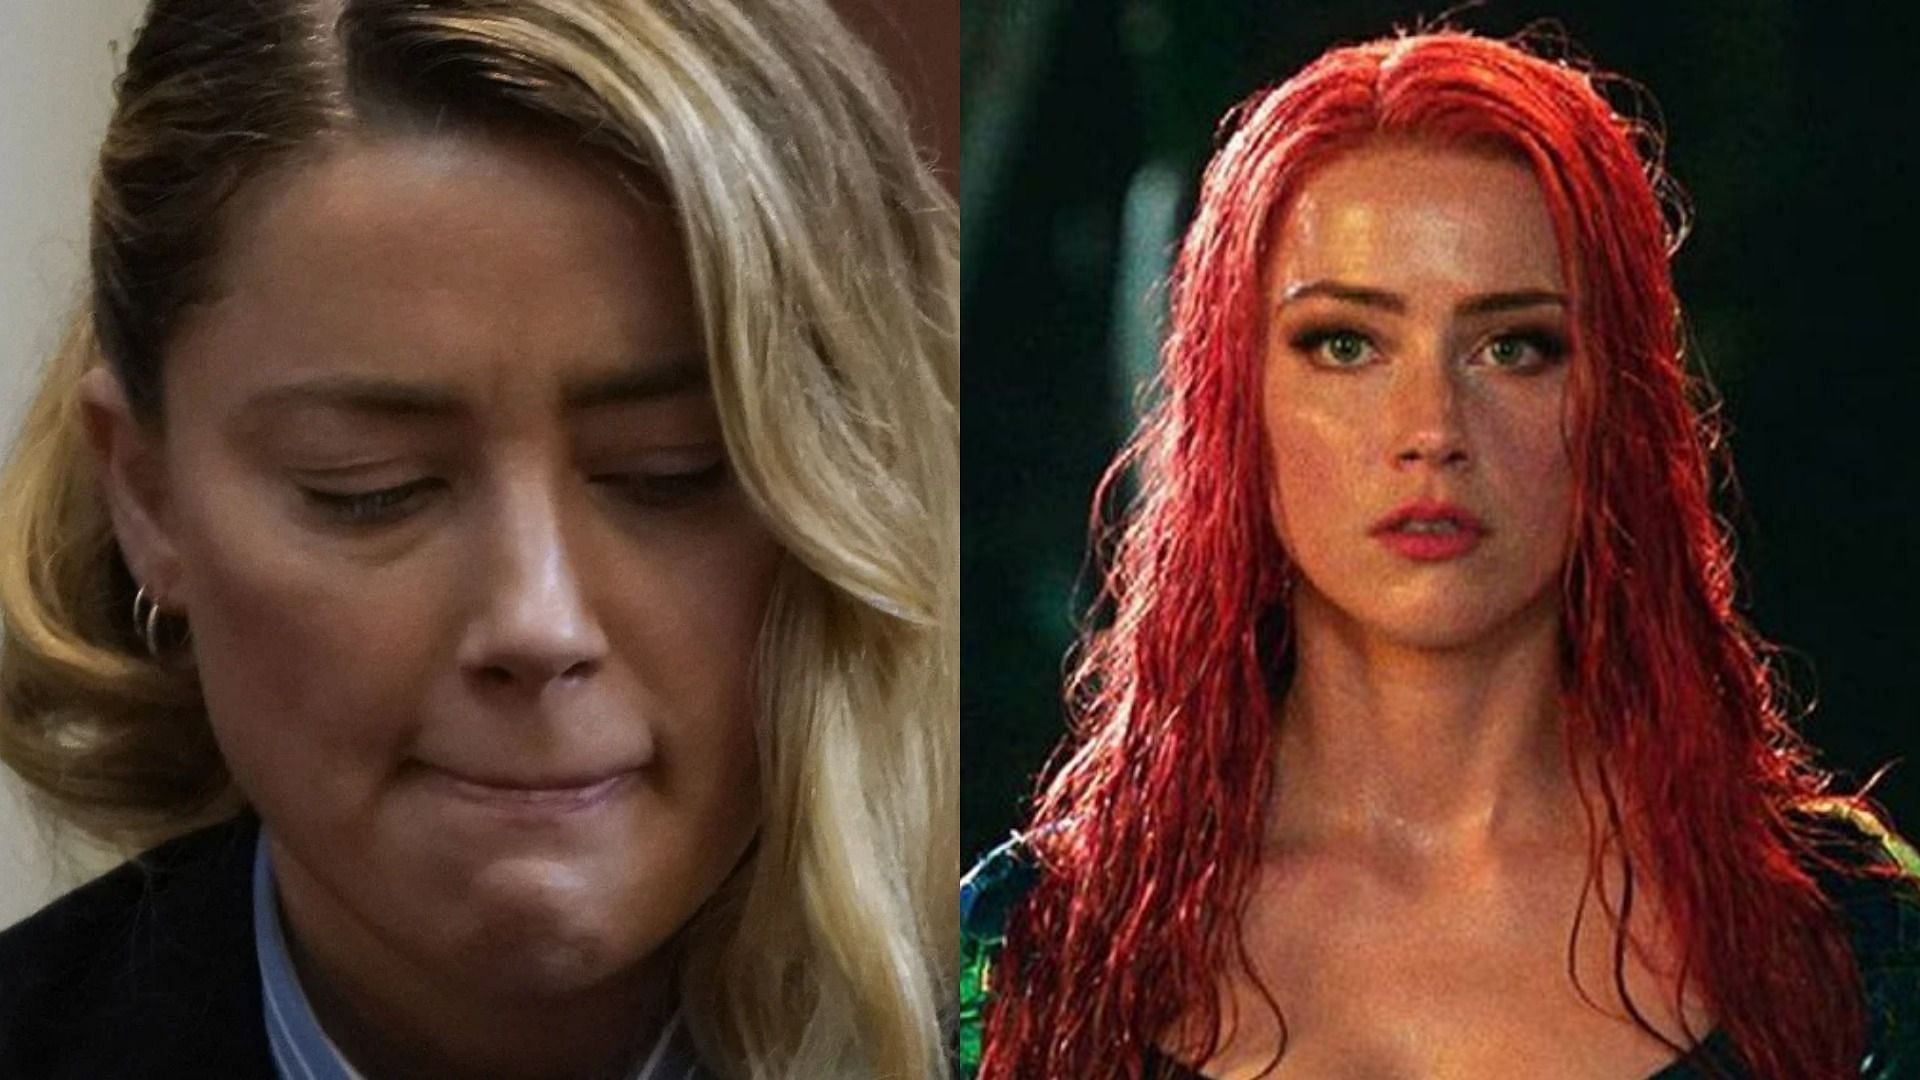 Amber Heard stated that her role in Aquaman 2 was cut down because of Johnny Depp&#039;s allegations against her. (Image via Getty Images/Elizabeth Frantz; Warner Bros)